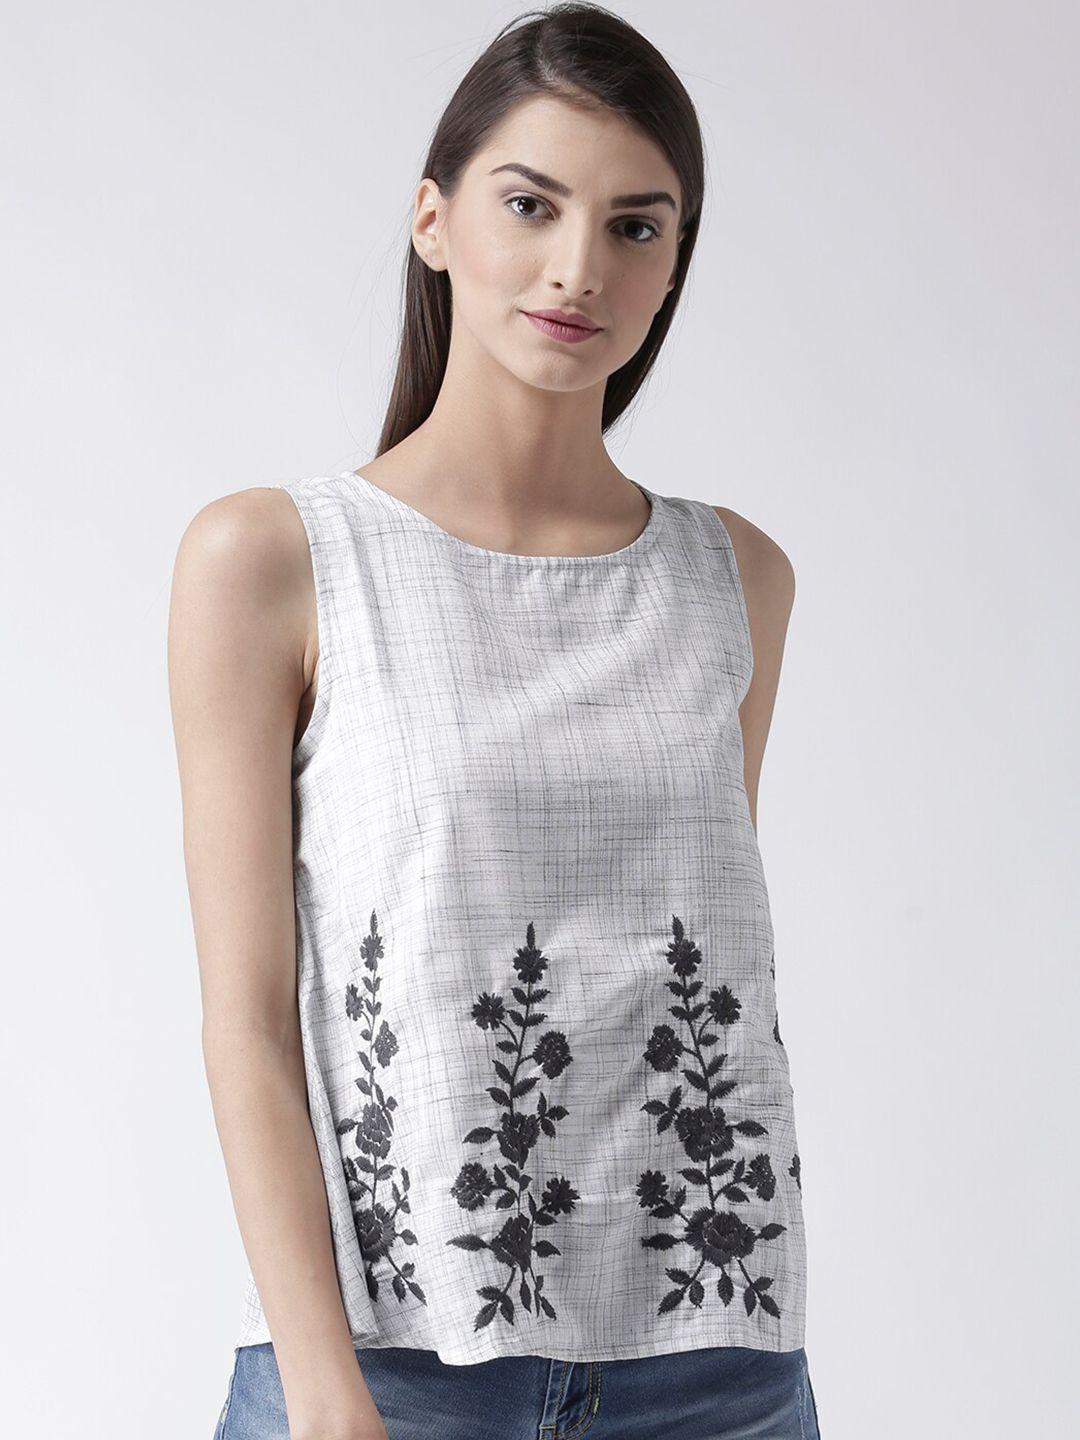 fusion-beats-grey-floral-embroidered-sleevless-regular-top